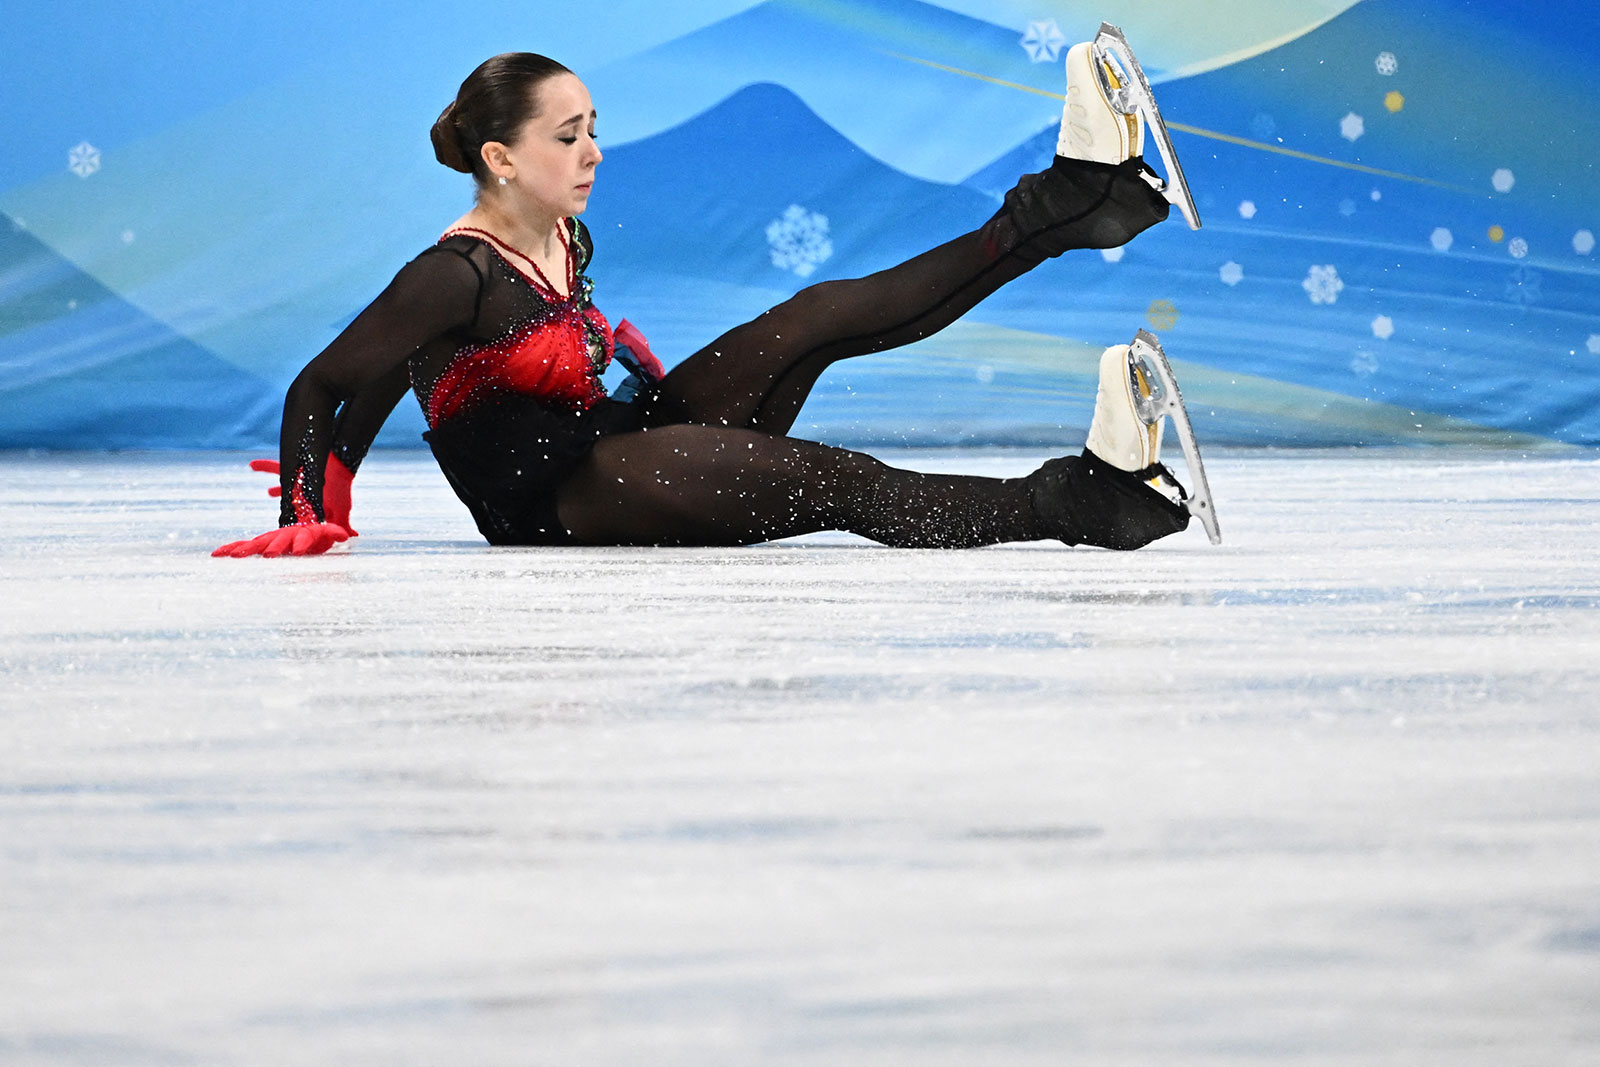 Figure skater Kamila Valieva falls during her free skate on Thursday, February 17. Valieva, who has been at the center of a doping controversy at the Beijing Winter Olympics, fell multiple times during her free skate Thursday and finished fourth in the women's singles competition.